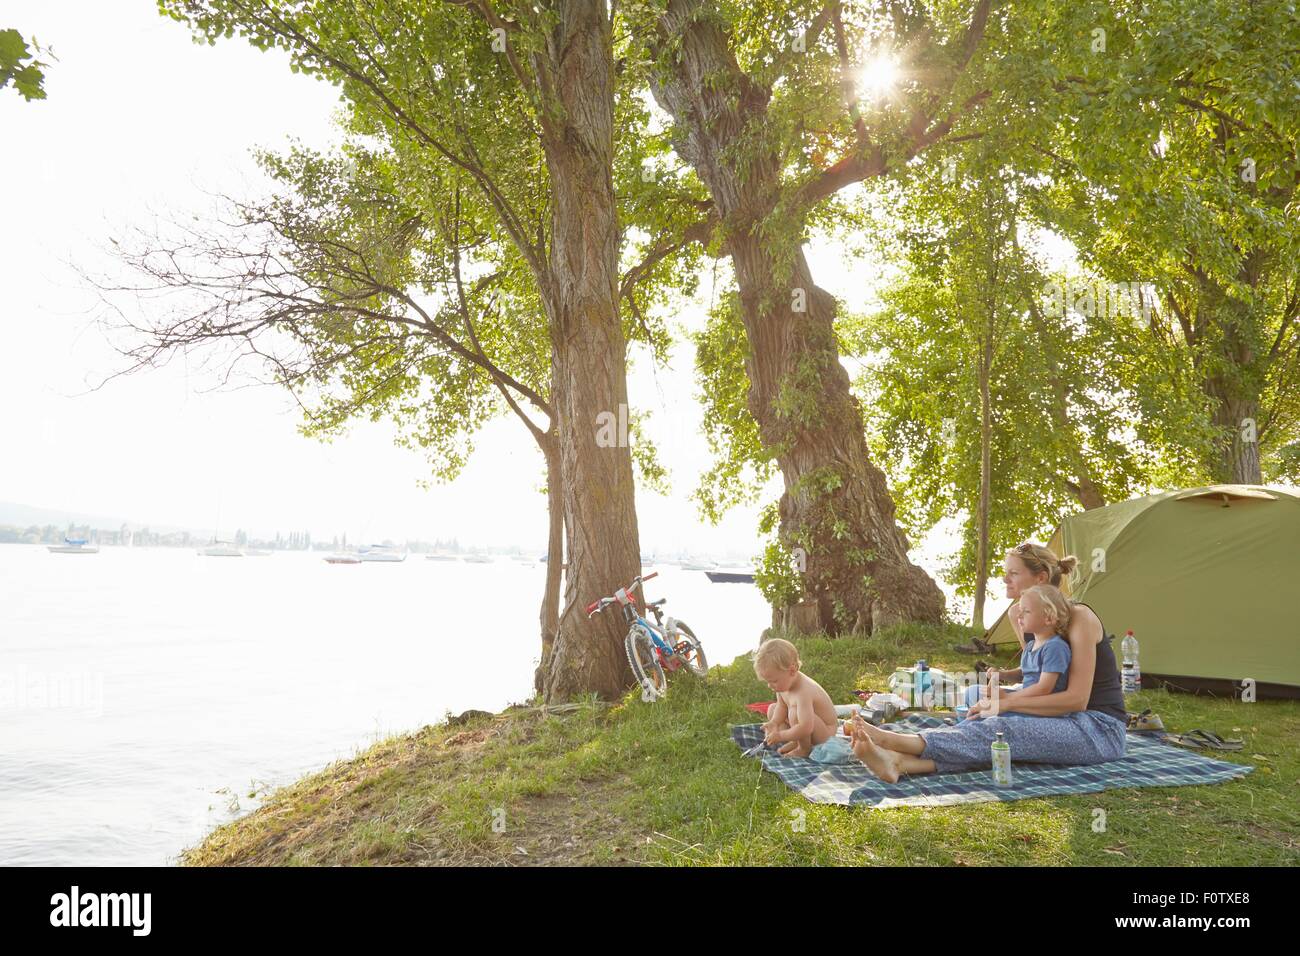 Mother and sons relaxing on picnic blanket in rural setting Stock Photo